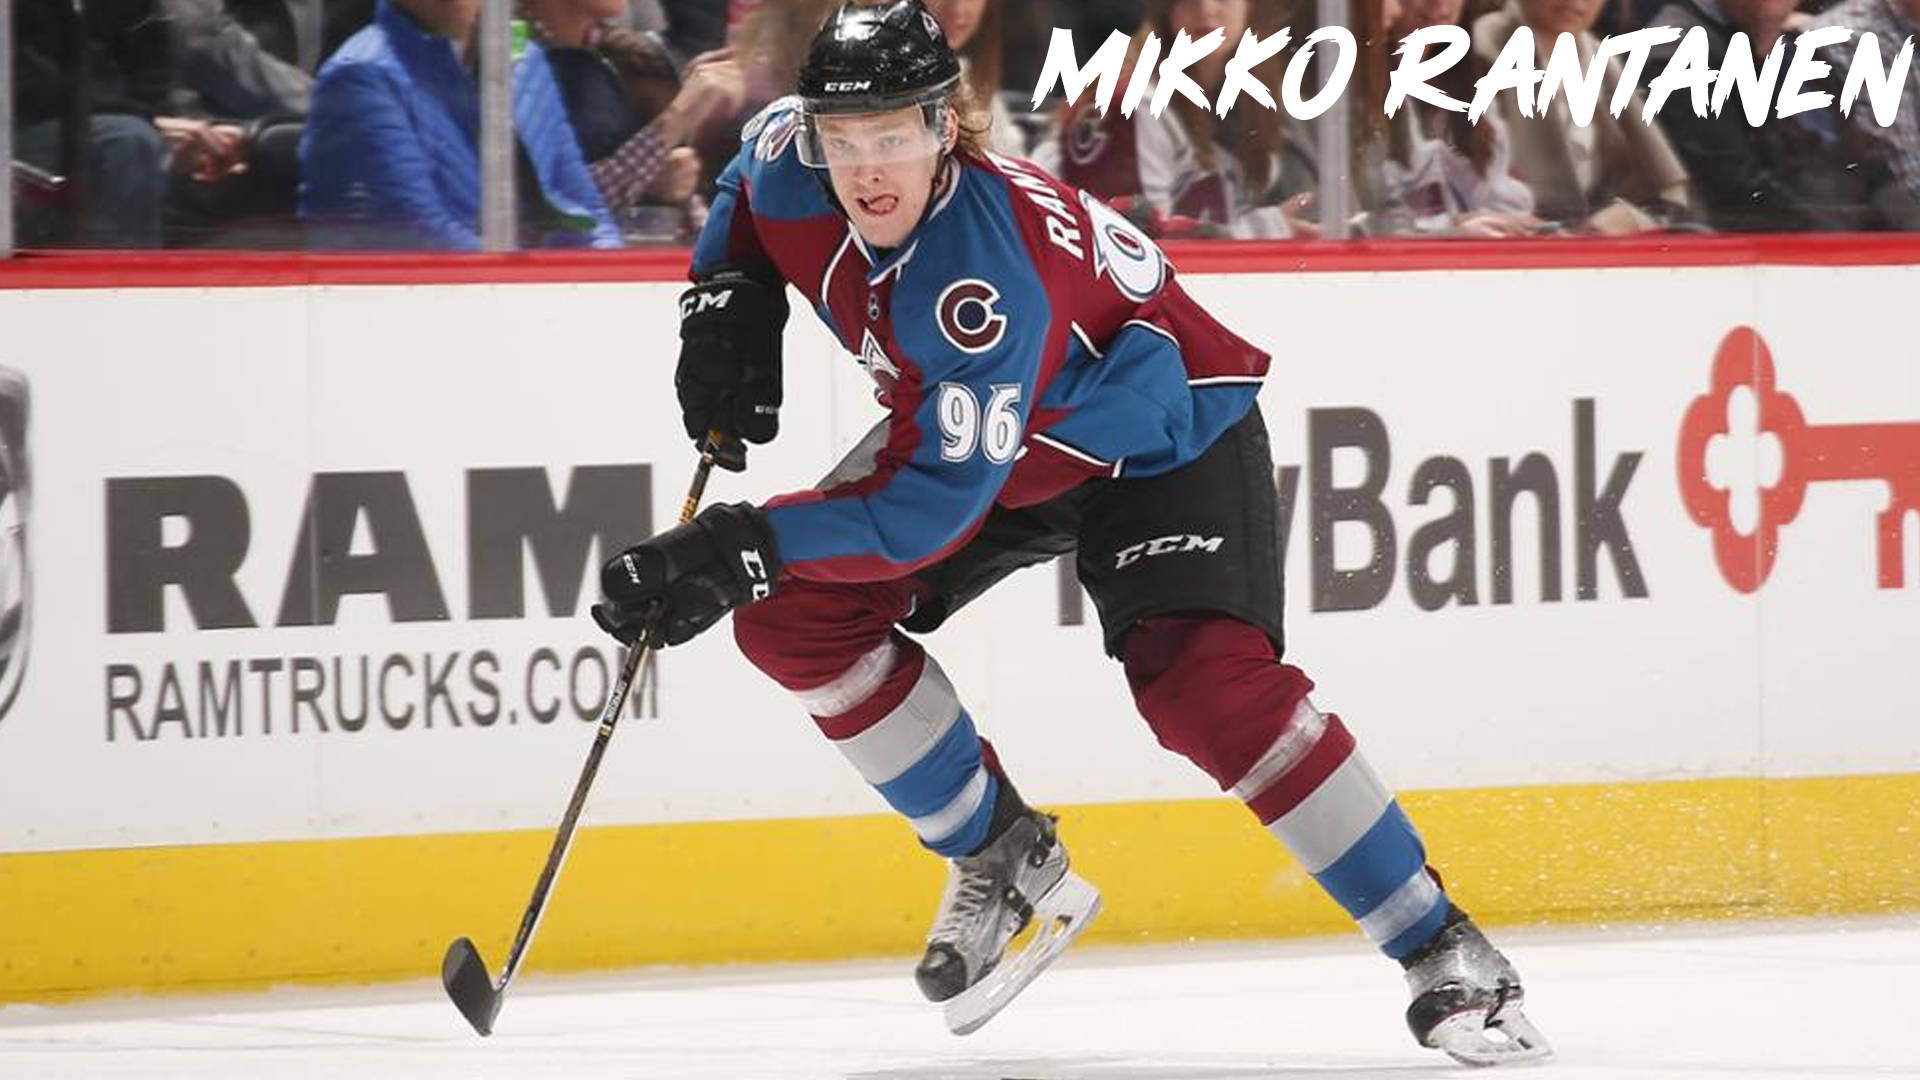 Enticing Snapshot Of Mikko Rantanen Cheekily Sticking Out His Tongue During An Intense Game Background